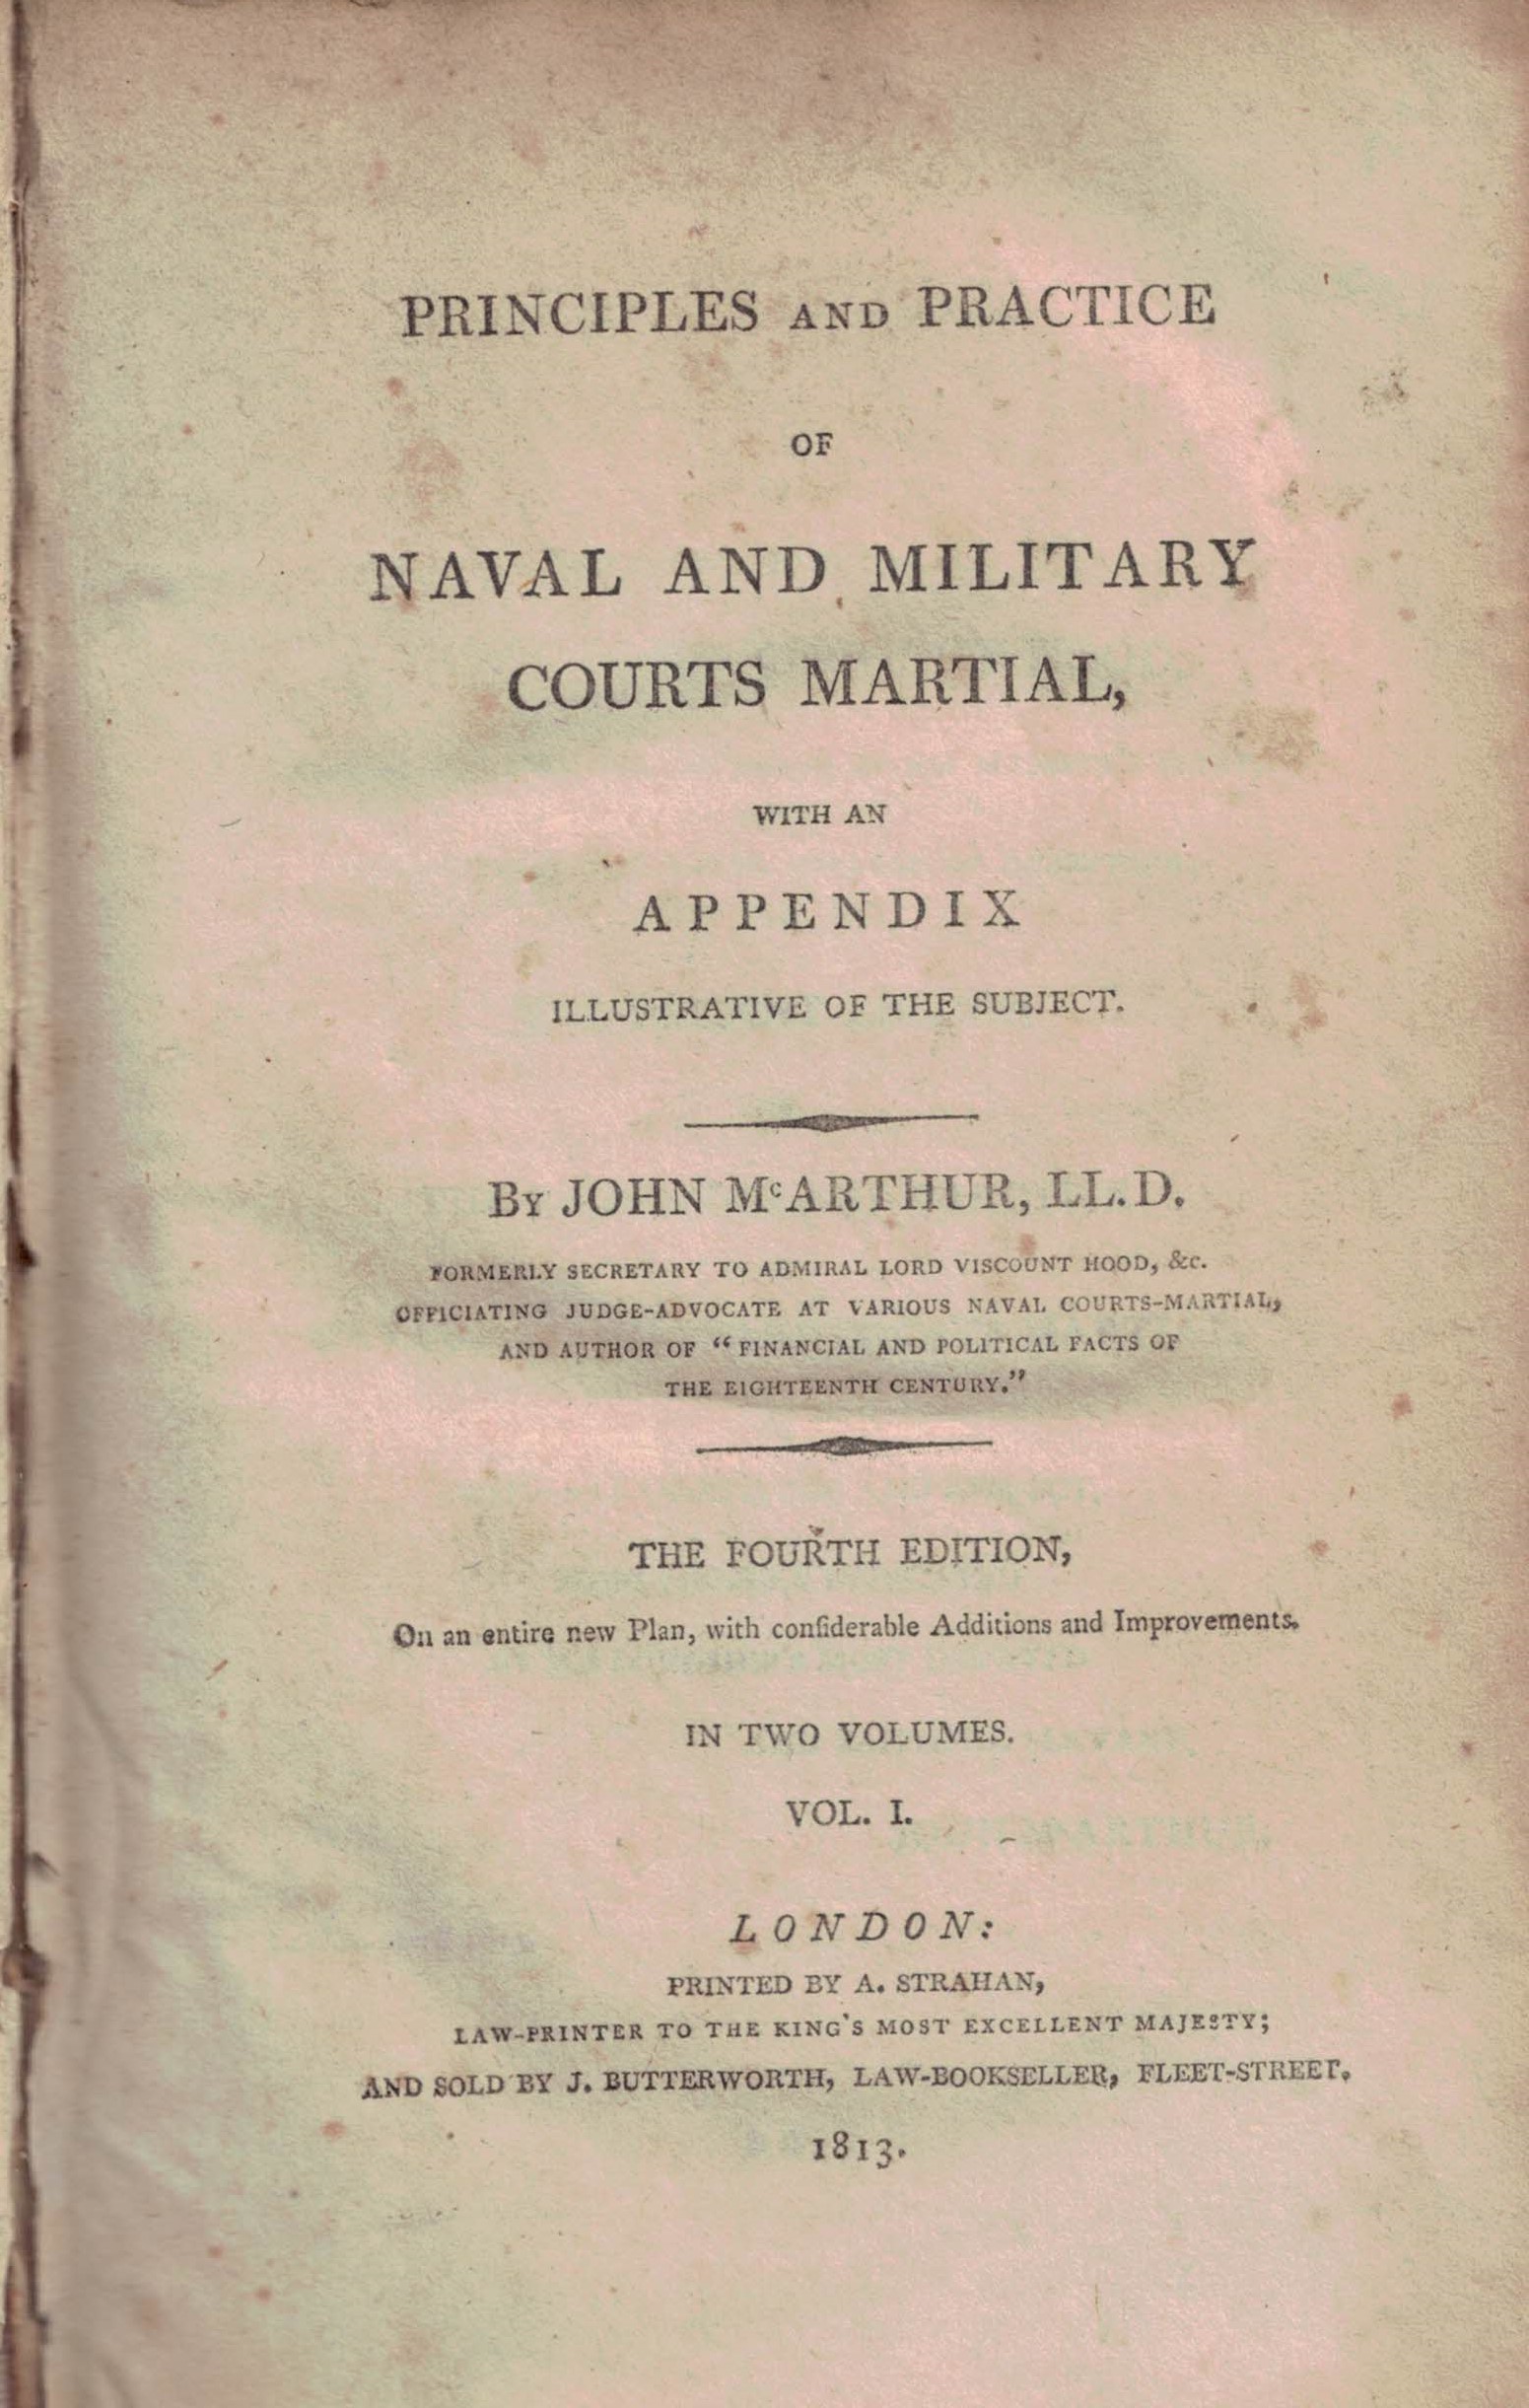 Principles and Practice of Naval and Military Courts Martial, with an Appendix Illustrative of the Subject. 2 volume set.